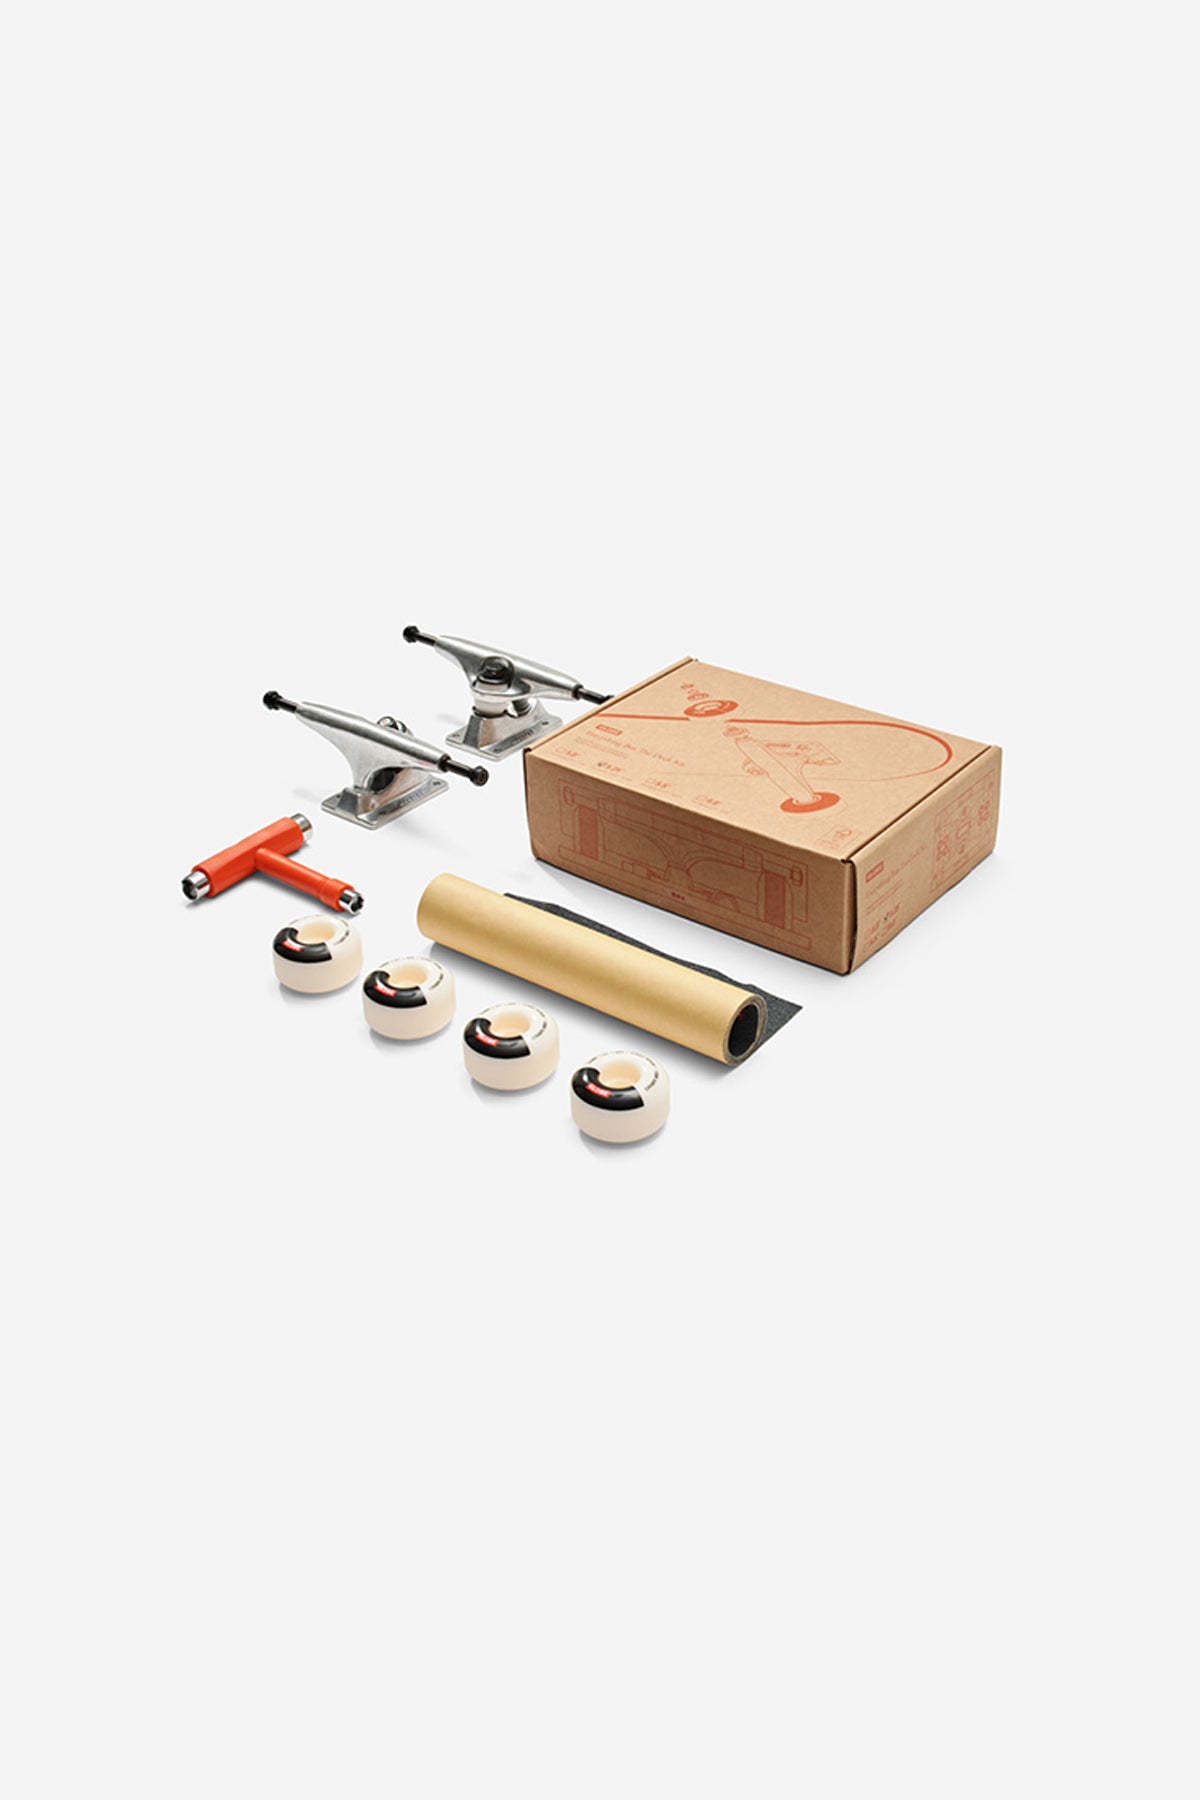 Everything But The Deck Kit